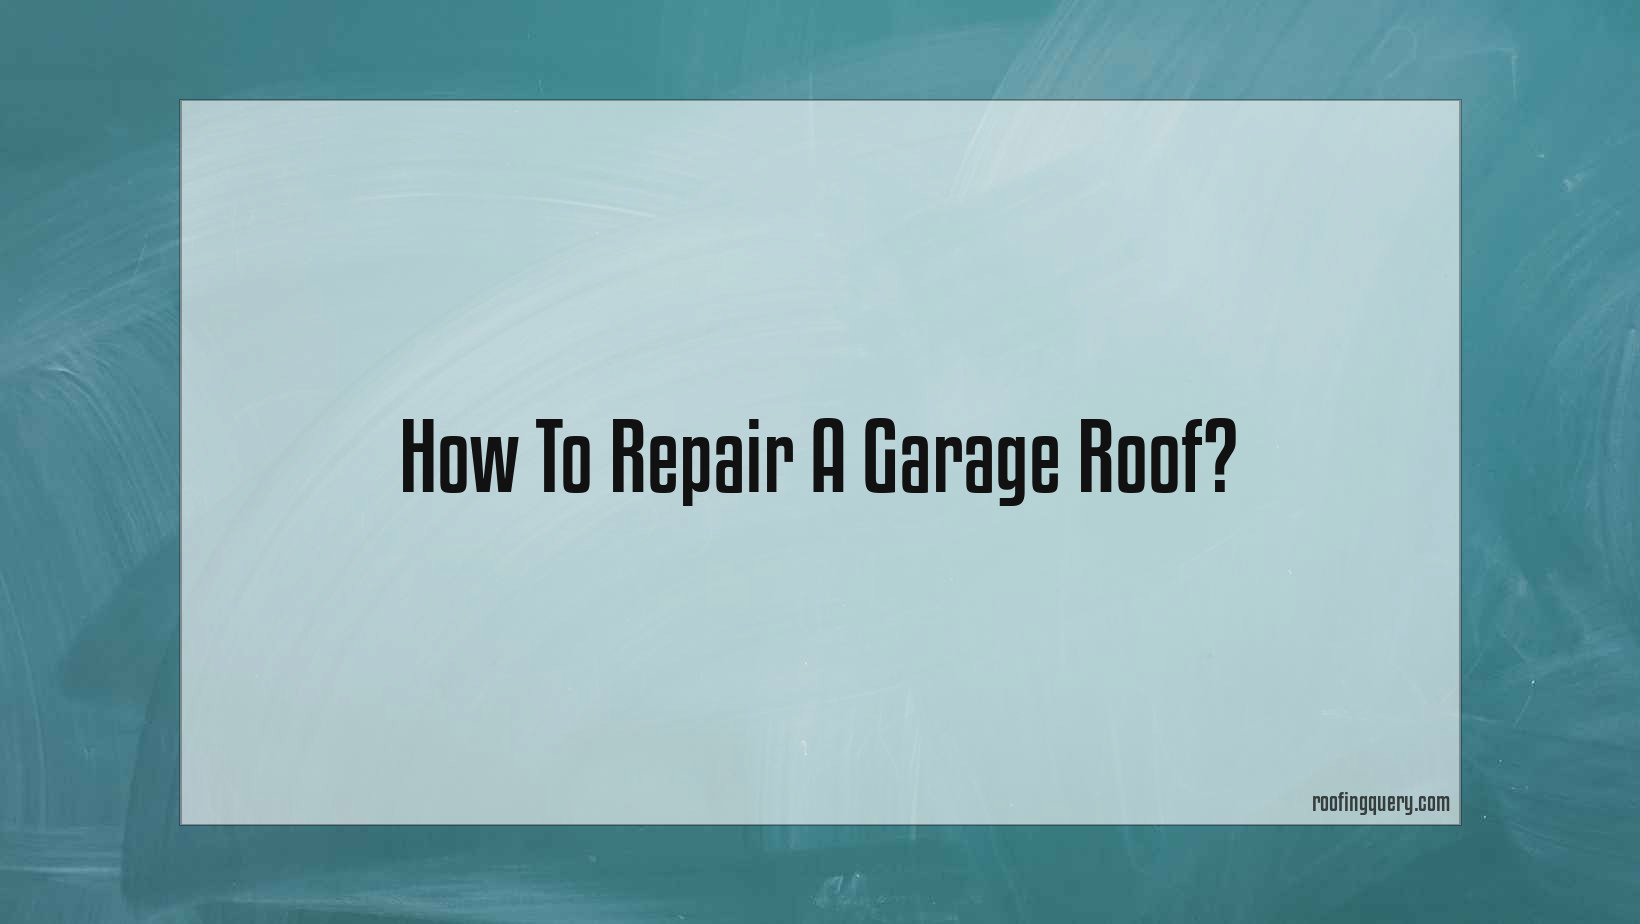 How To Repair A Garage Roof?